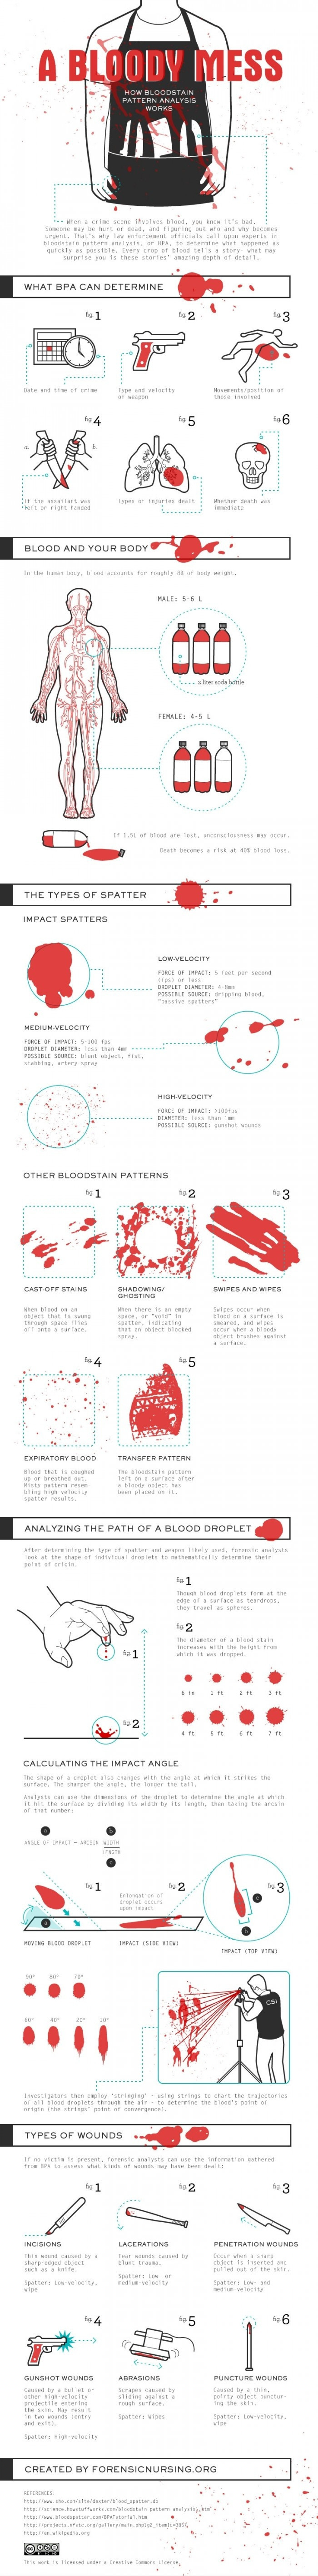 How to analyze a bloody mess.